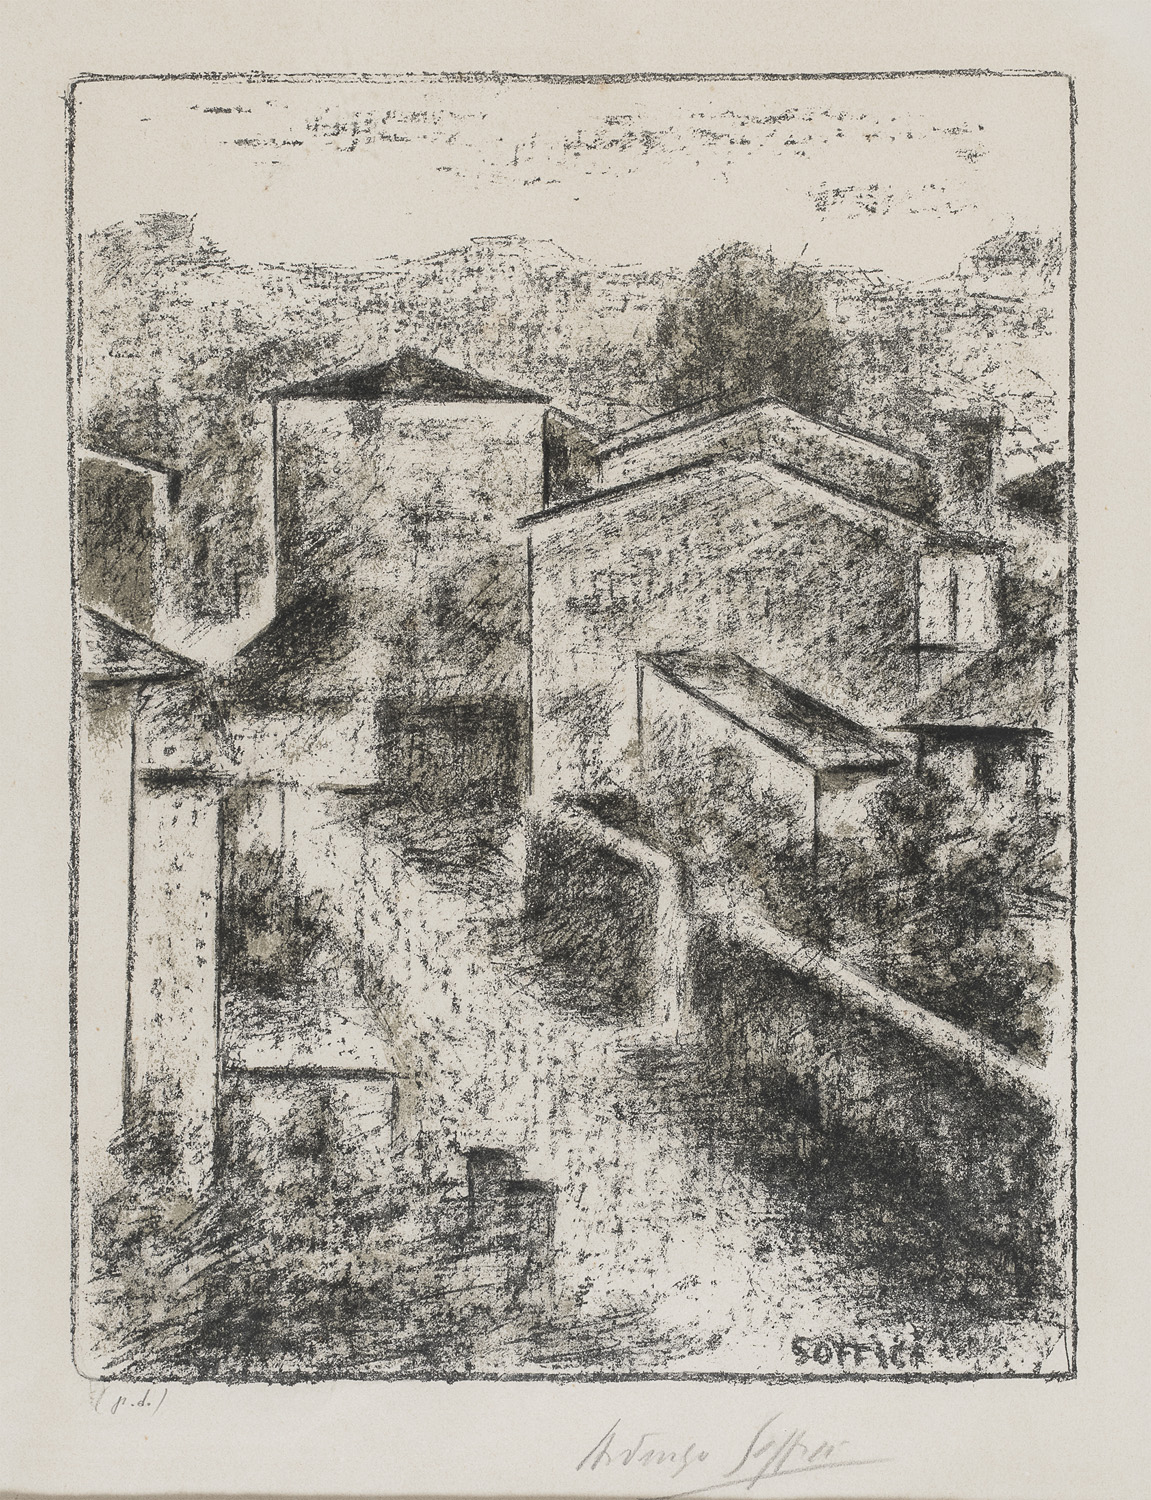 LITHOGRAPH BY ARDENGO SOFFICI